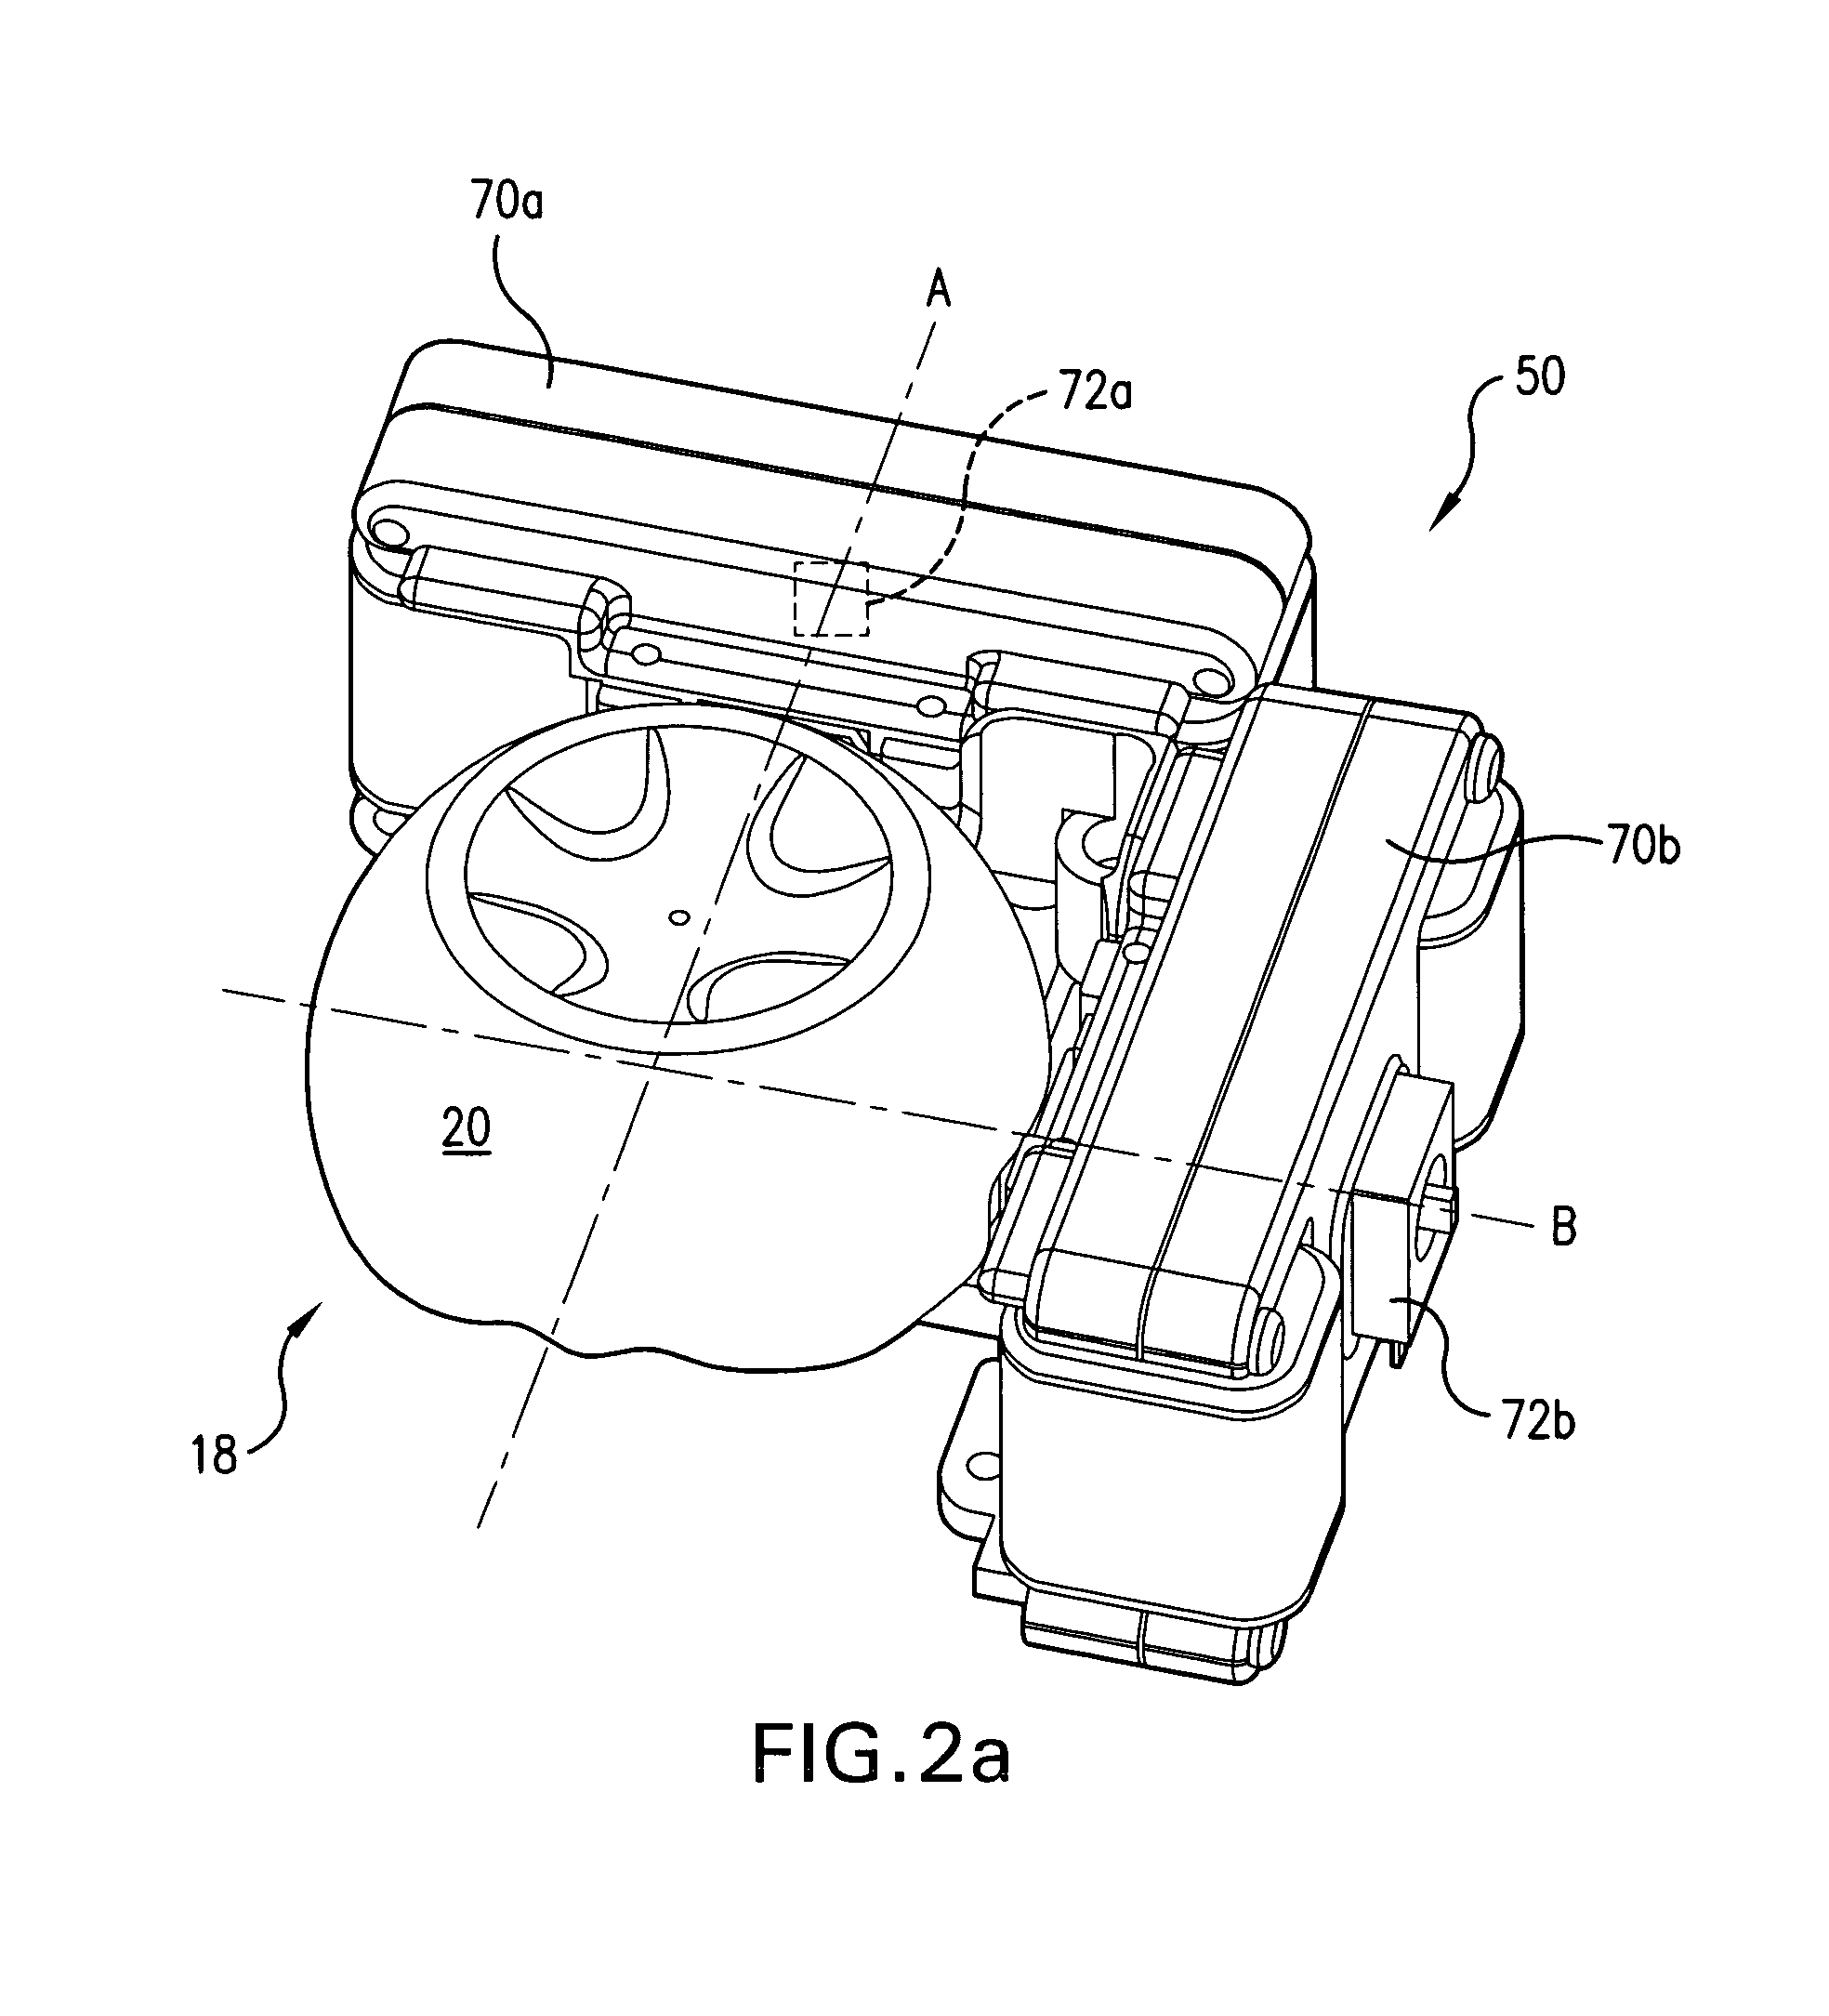 Force output adjustment in force feedback devices based on user contact